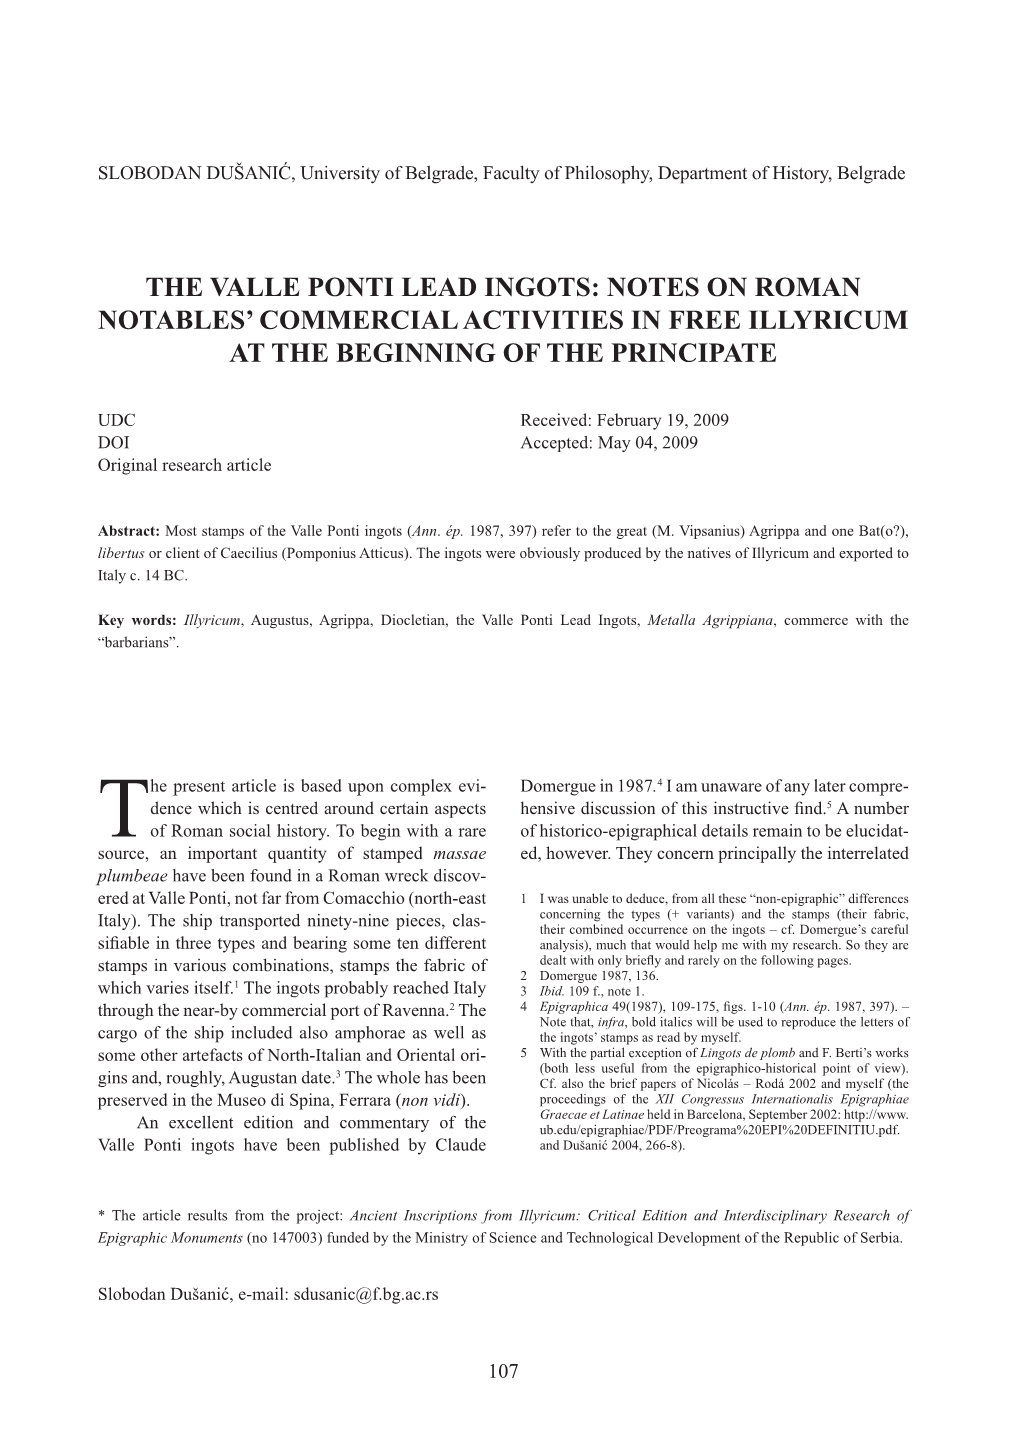 The Valle Ponti Lead Ingots: Notes on Roman Notables’ Commercial Activities in Free Illyricum